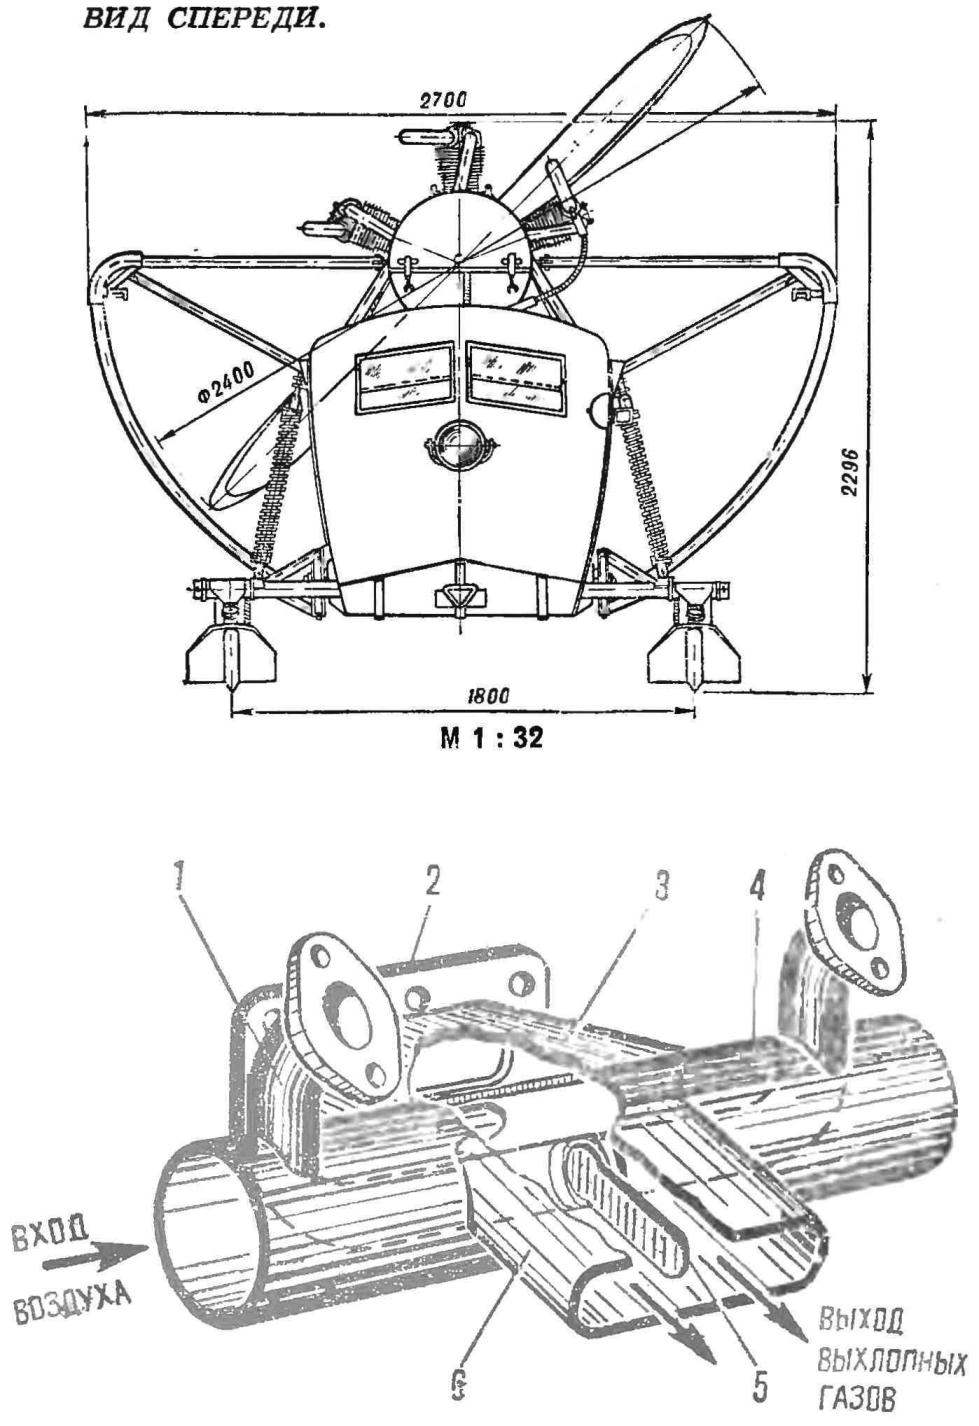 Fig. 5. The heater air inlet in the carb